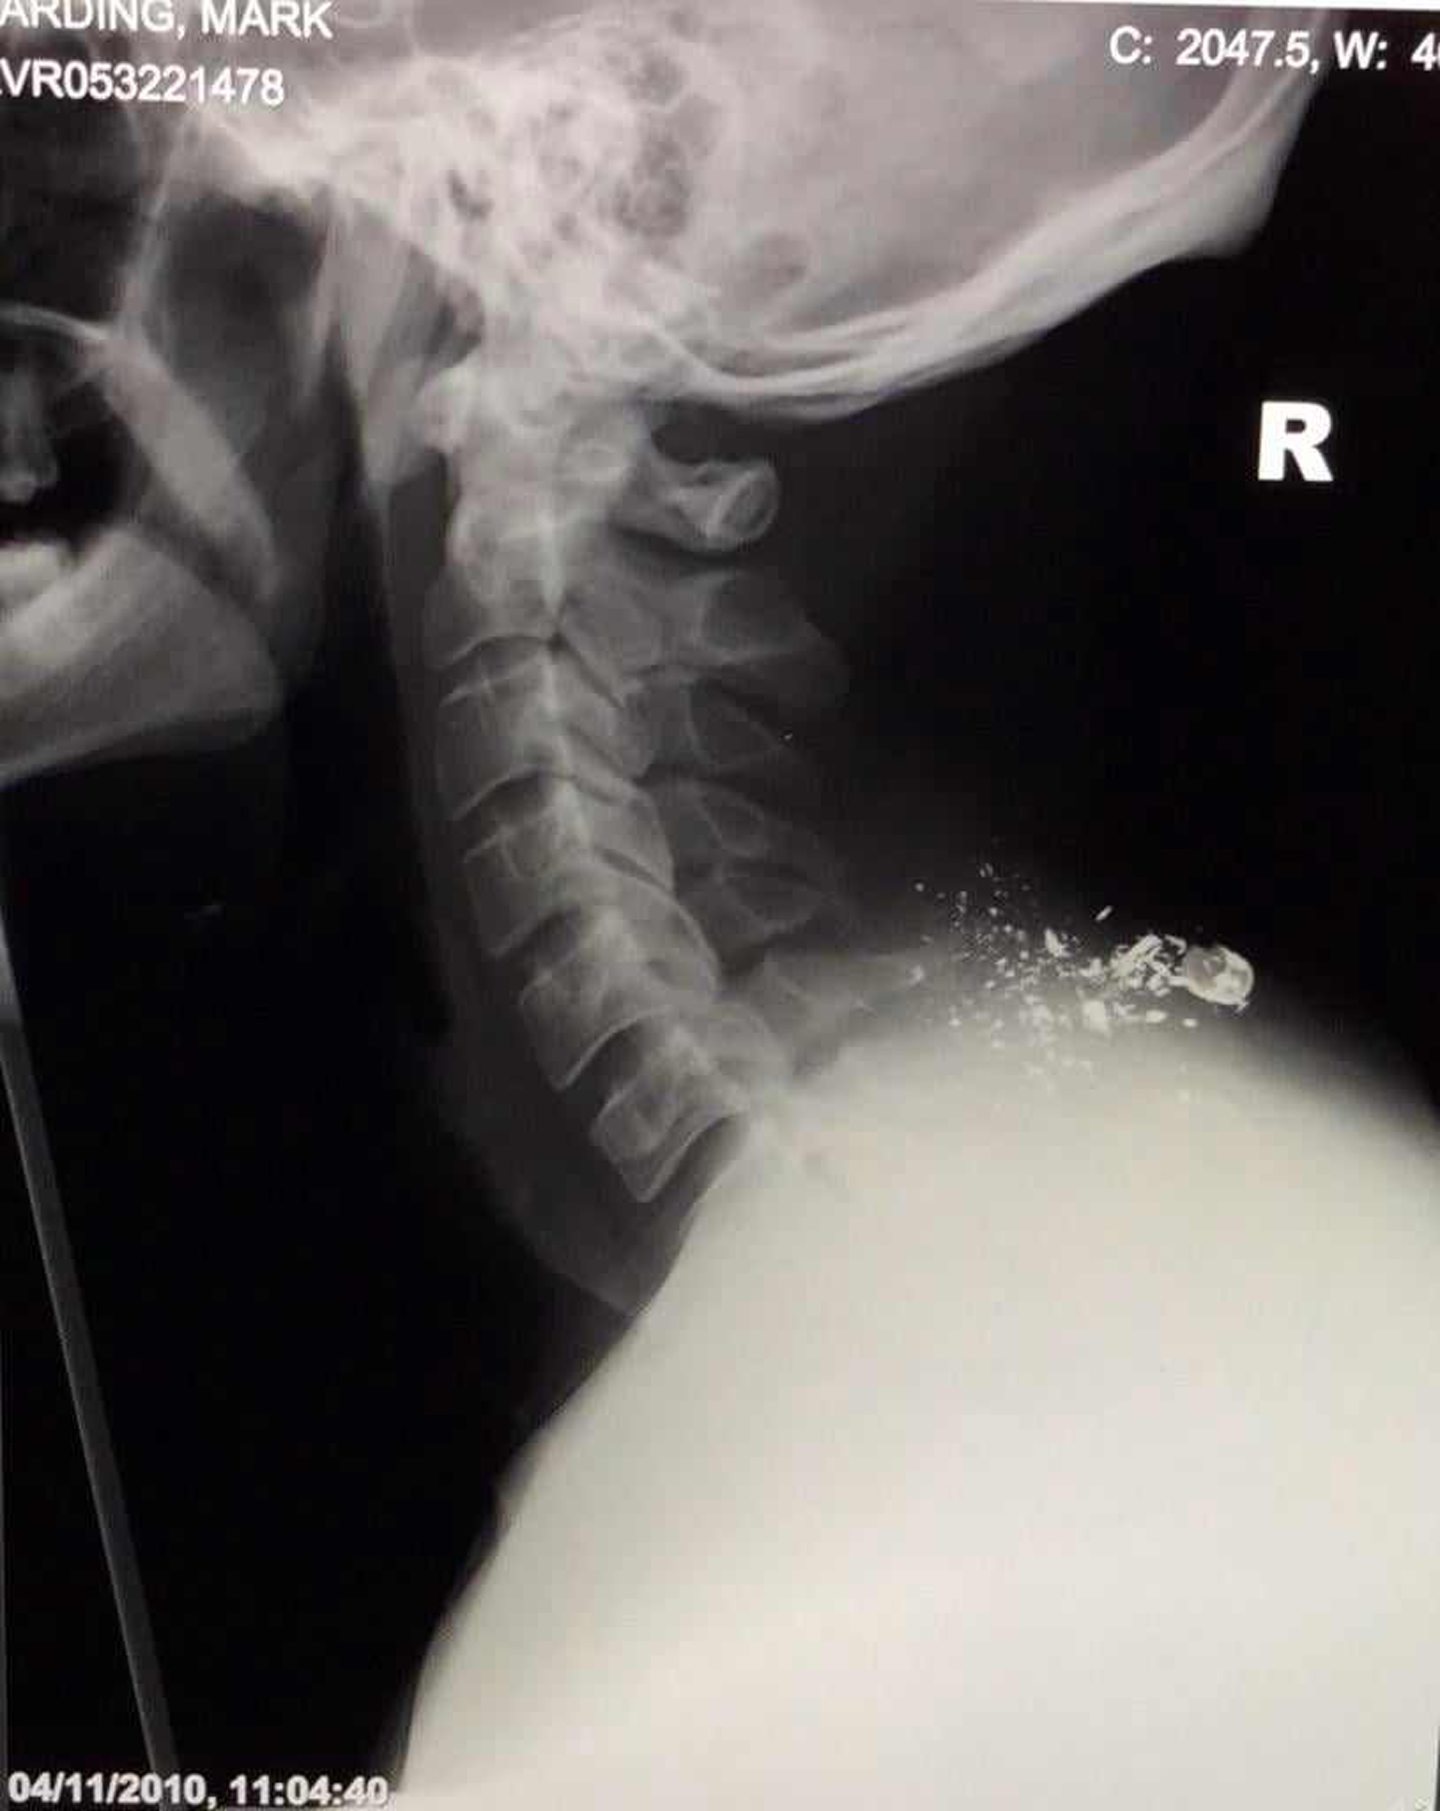 The x-ray showing the bullet lodged in Mark's neck.